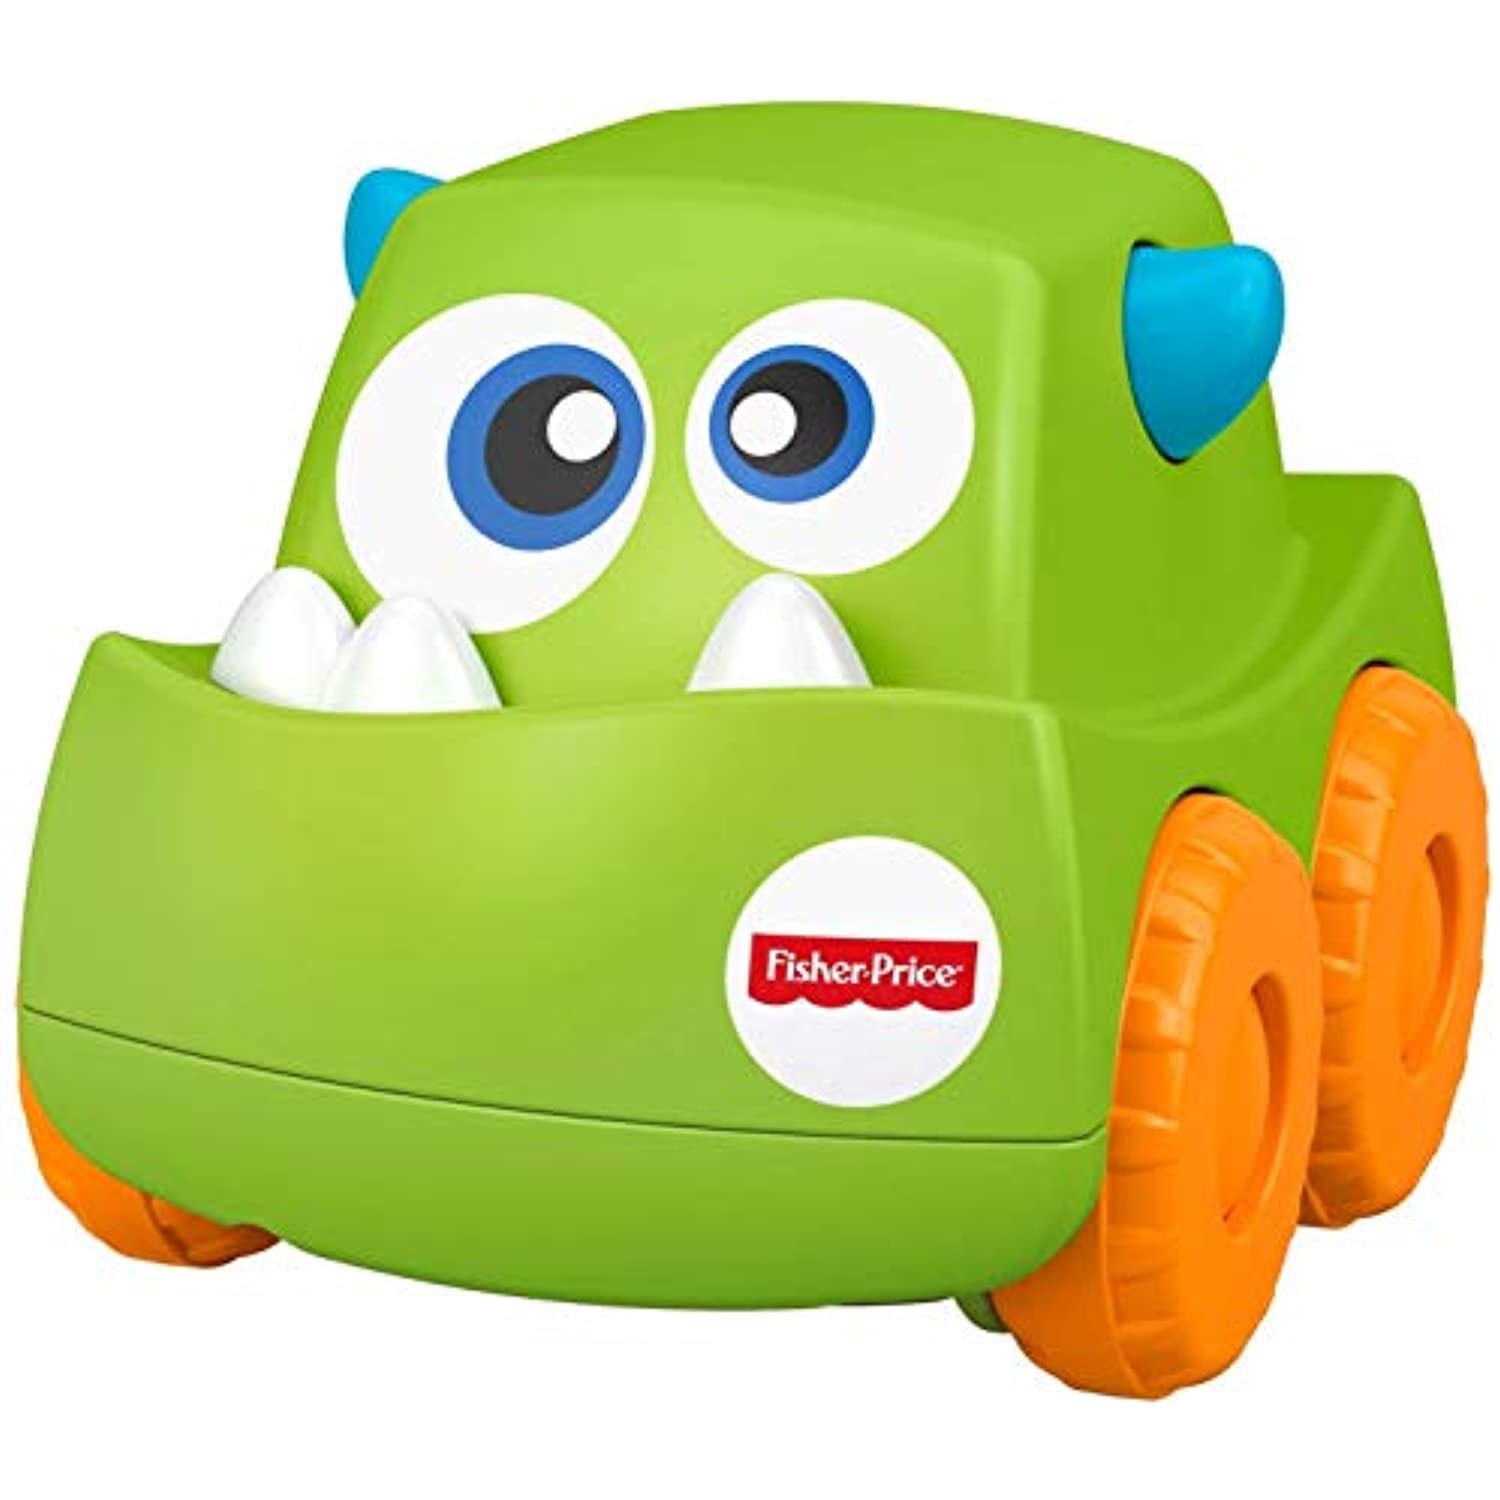 Fisher-Price Bundled Toys Mini Monster Vehicle ~ Includes Mini Monster Vehicles #1, #2, #3 and #4 in Blue, Yellow, Green and Pink